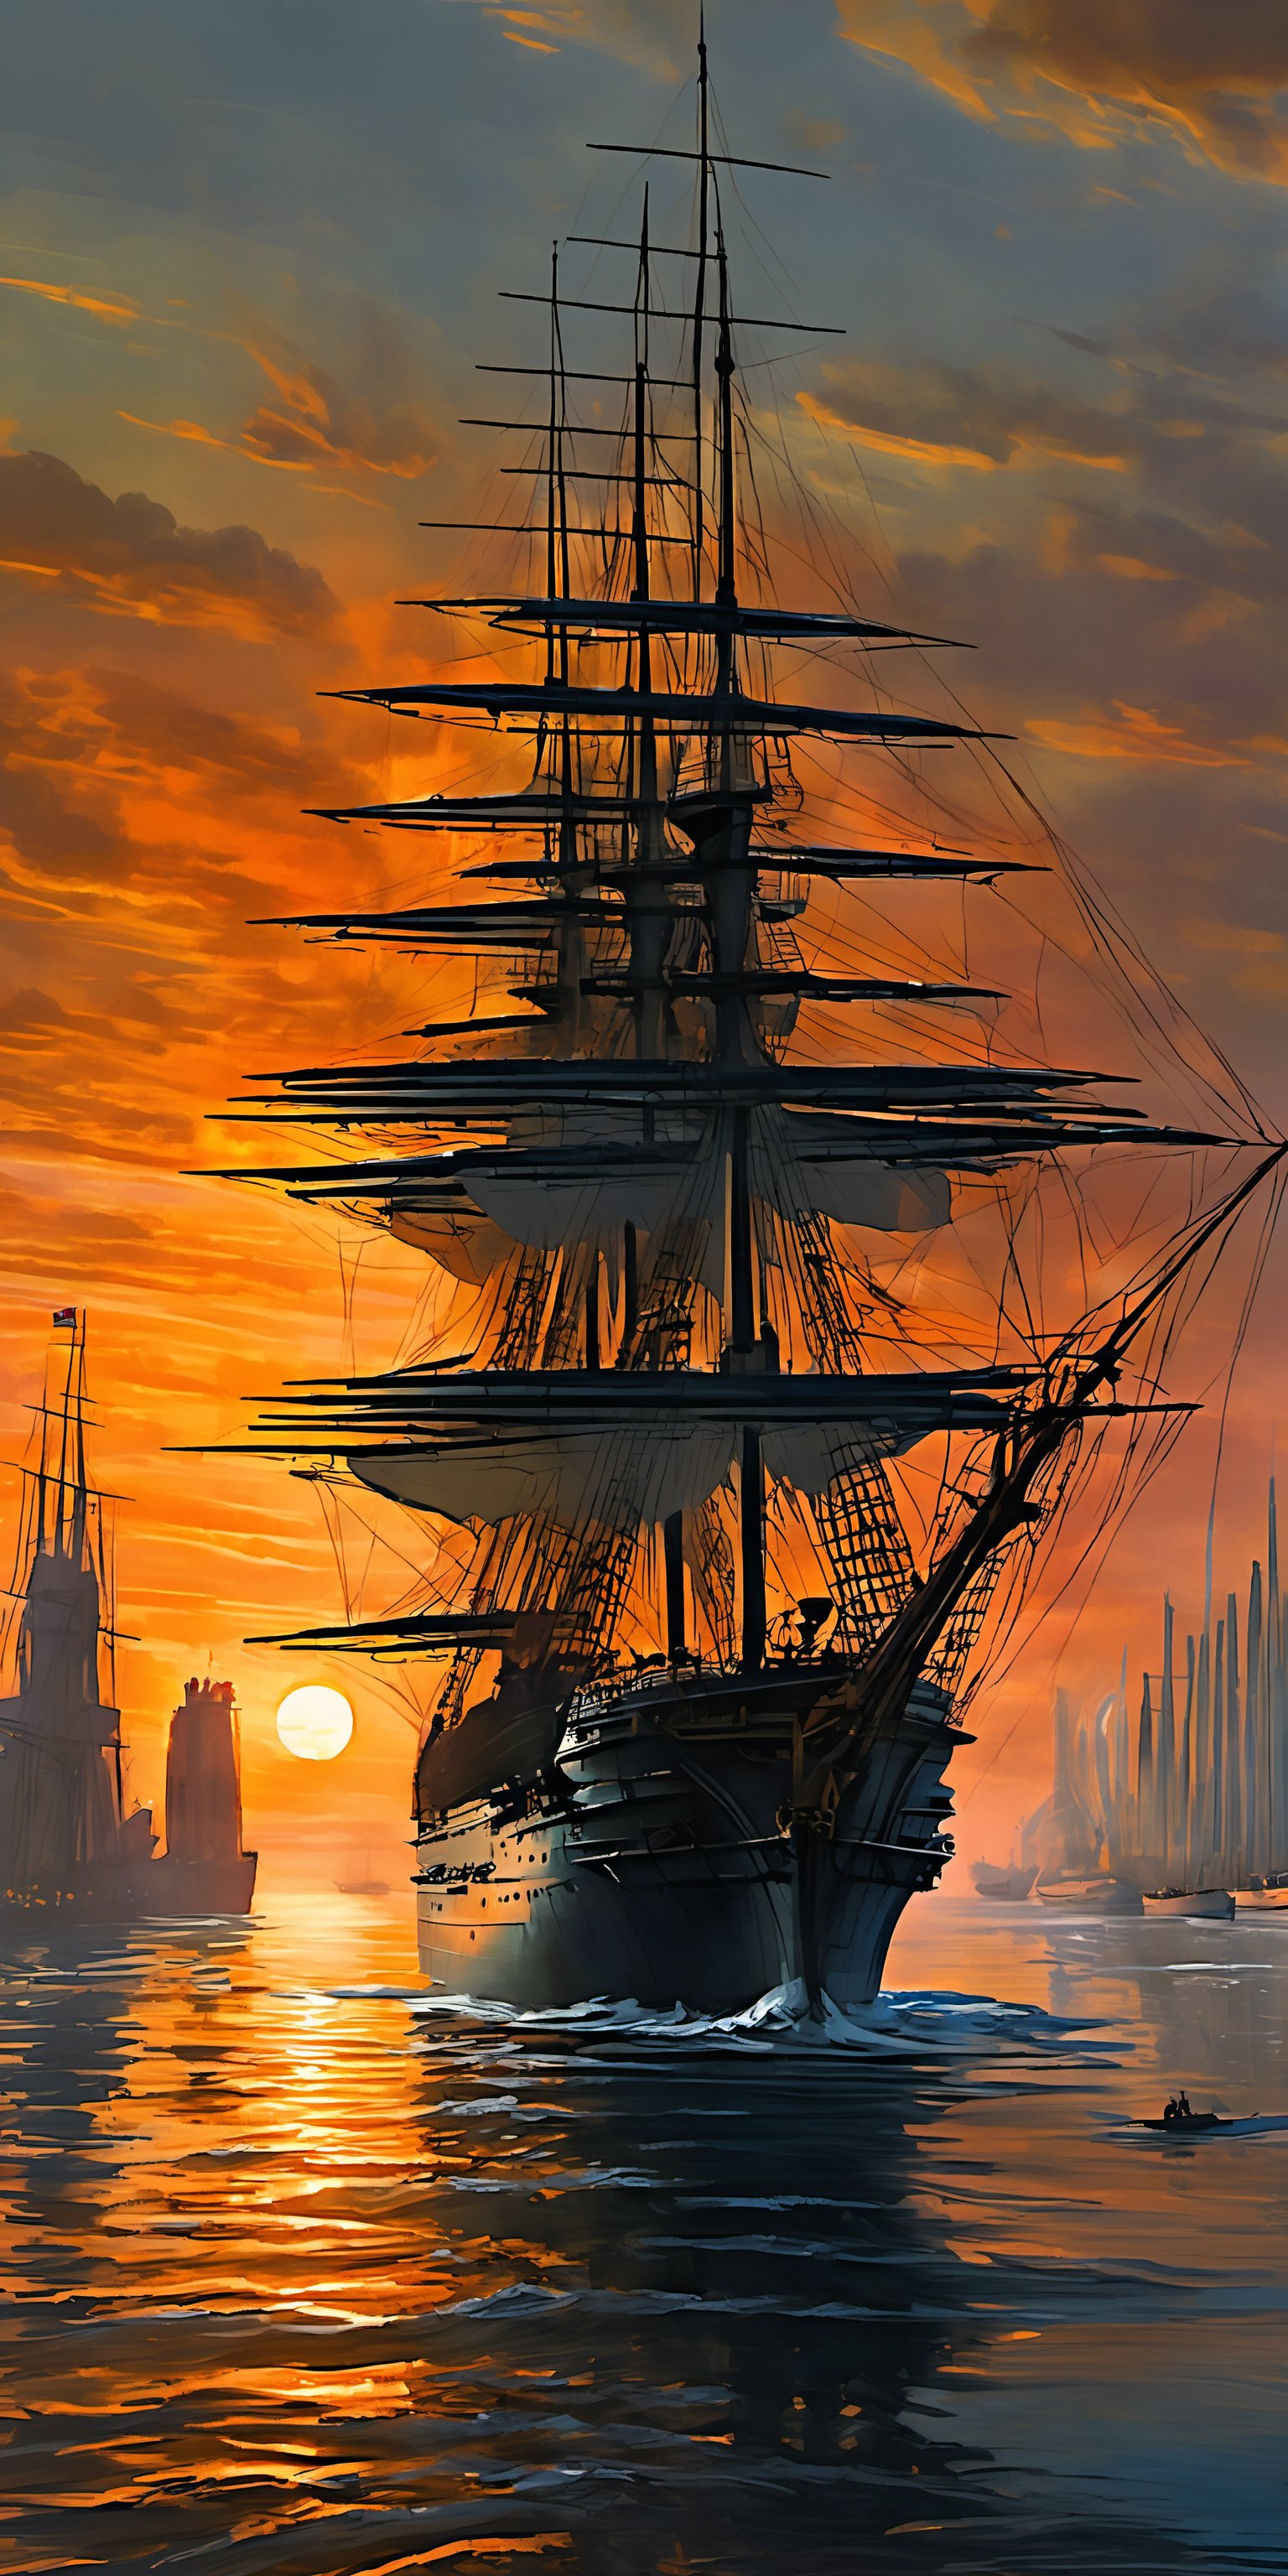 "The image captures the majestic and serene beauty of an English ship-of-the-line sailing battleship resting calmly in a harbor, creating a cohesive theme focused on the grandeur and tranquility of naval power at rest. The formidable ship is the primary focus, with meticulous attention to its form, structure, and intricate details, highlighting the elegance and majesty of the battleship. The powerful vessel enhances the narrative of naval supremacy and historical maritime presence. The image employs a warm, vibrant color palette dominated by the golden and orange hues of the setting sun, which sets a peaceful and enchanting atmosphere. There is a strong contrast between the dark silhouette of the ship and the glowing, colorful sky, adding depth and highlighting the ship’s impressive outline. The use of the sunset's radiant light casts a serene and beautiful glow over the scene, creating a calming and majestic atmosphere, and the interplay of light and shadow enhances the forms and shapes, giving the image a three-dimensional quality. Using strong contrasts between the dark ship and the bright sunset sky adds a dramatic effect and emphasizes the ship's elegant presence in the harbor. The intricate details and realistic portrayal of the battleship and the surrounding harbor reflect a hyperrealistic style, with the artist’s skill in rendering textures, such as the smooth water and the detailed rigging, being particularly noteworthy. The composition is dynamic, with the ship positioned against the setting sun, leading the viewer’s eye through the image. The portrayal of the ship-of-the-line in a peaceful harbor evokes feelings of admiration and tranquility, with the dramatic lighting and composition adding to the sense of grandeur and calmness. The clear, diffused lighting and the beautiful seascape create an ethereal and uplifting atmosphere, suggesting both beauty and serenity. The consistent theme of a formidable battleship and a tranquil harbor suggests a deep appreciation for naval history and the peaceful moments of maritime life, with the image intent on capturing the essence of beauty and majesty in a serene environment. By emphasizing the calm and elegant appearance of the ship, the image conveys a narrative of prestige and tranquility, highlighting the serene realities of naval power at rest. The use of clean, sharp lines in the depiction of the rigging and hull creates a sense of clarity and precision, while the detailed rendering of textures, from the smooth water to the silhouetted sails, adds a tactile quality to the image. The background transitions into a vibrant, painterly sunset sky with glowing hues, emphasizing mood and atmosphere over detailed realism. The selective focus on the ship-of-the-line, with the background rendered in a looser style, creates a strong focal point and enhances the overall impact of the image. The image emphasizes the themes of naval strength, historical grandeur, and the serene beauty of maritime power, evoking a powerful narrative through its detailed and dynamic depictions of an English ship-of-the-line in its natural, peaceful harbor environment."